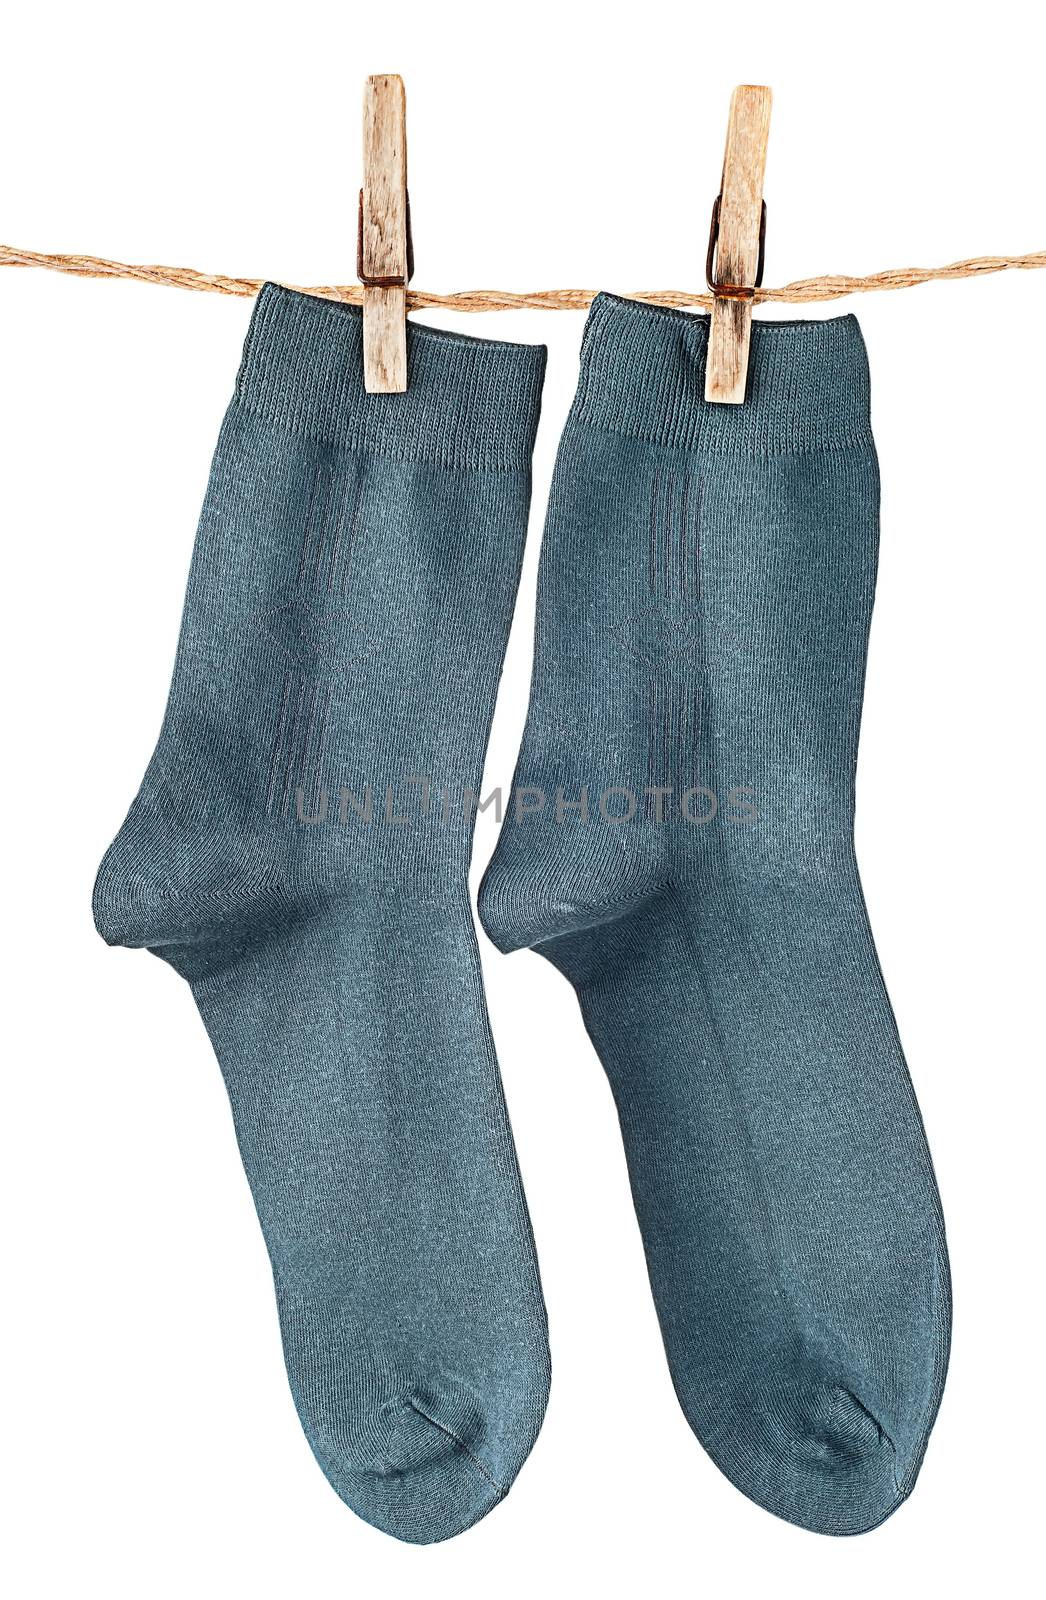 Dark blue socks on rope with clothespins isolated on white background